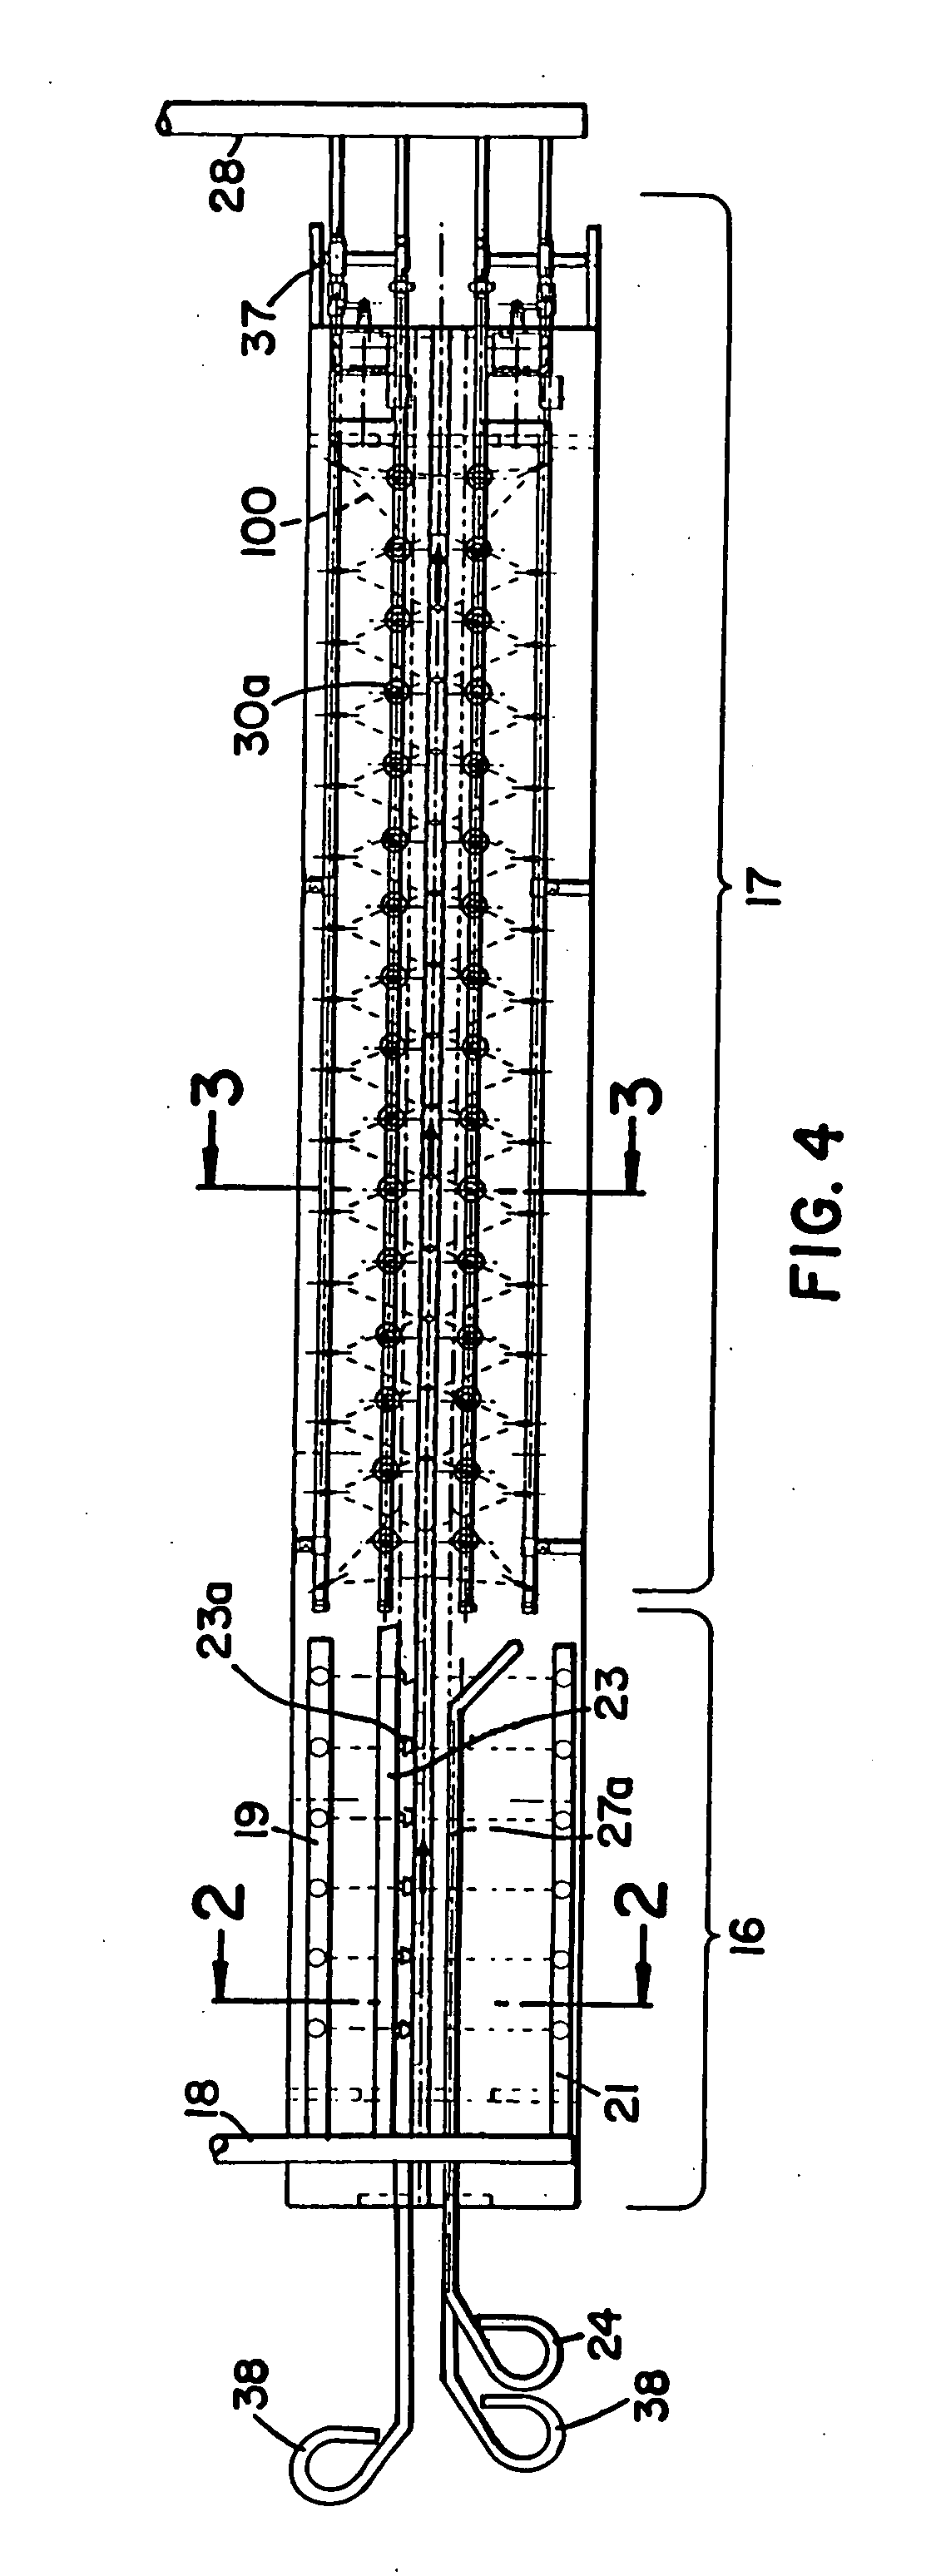 Apparatus and method for cleaning poultry